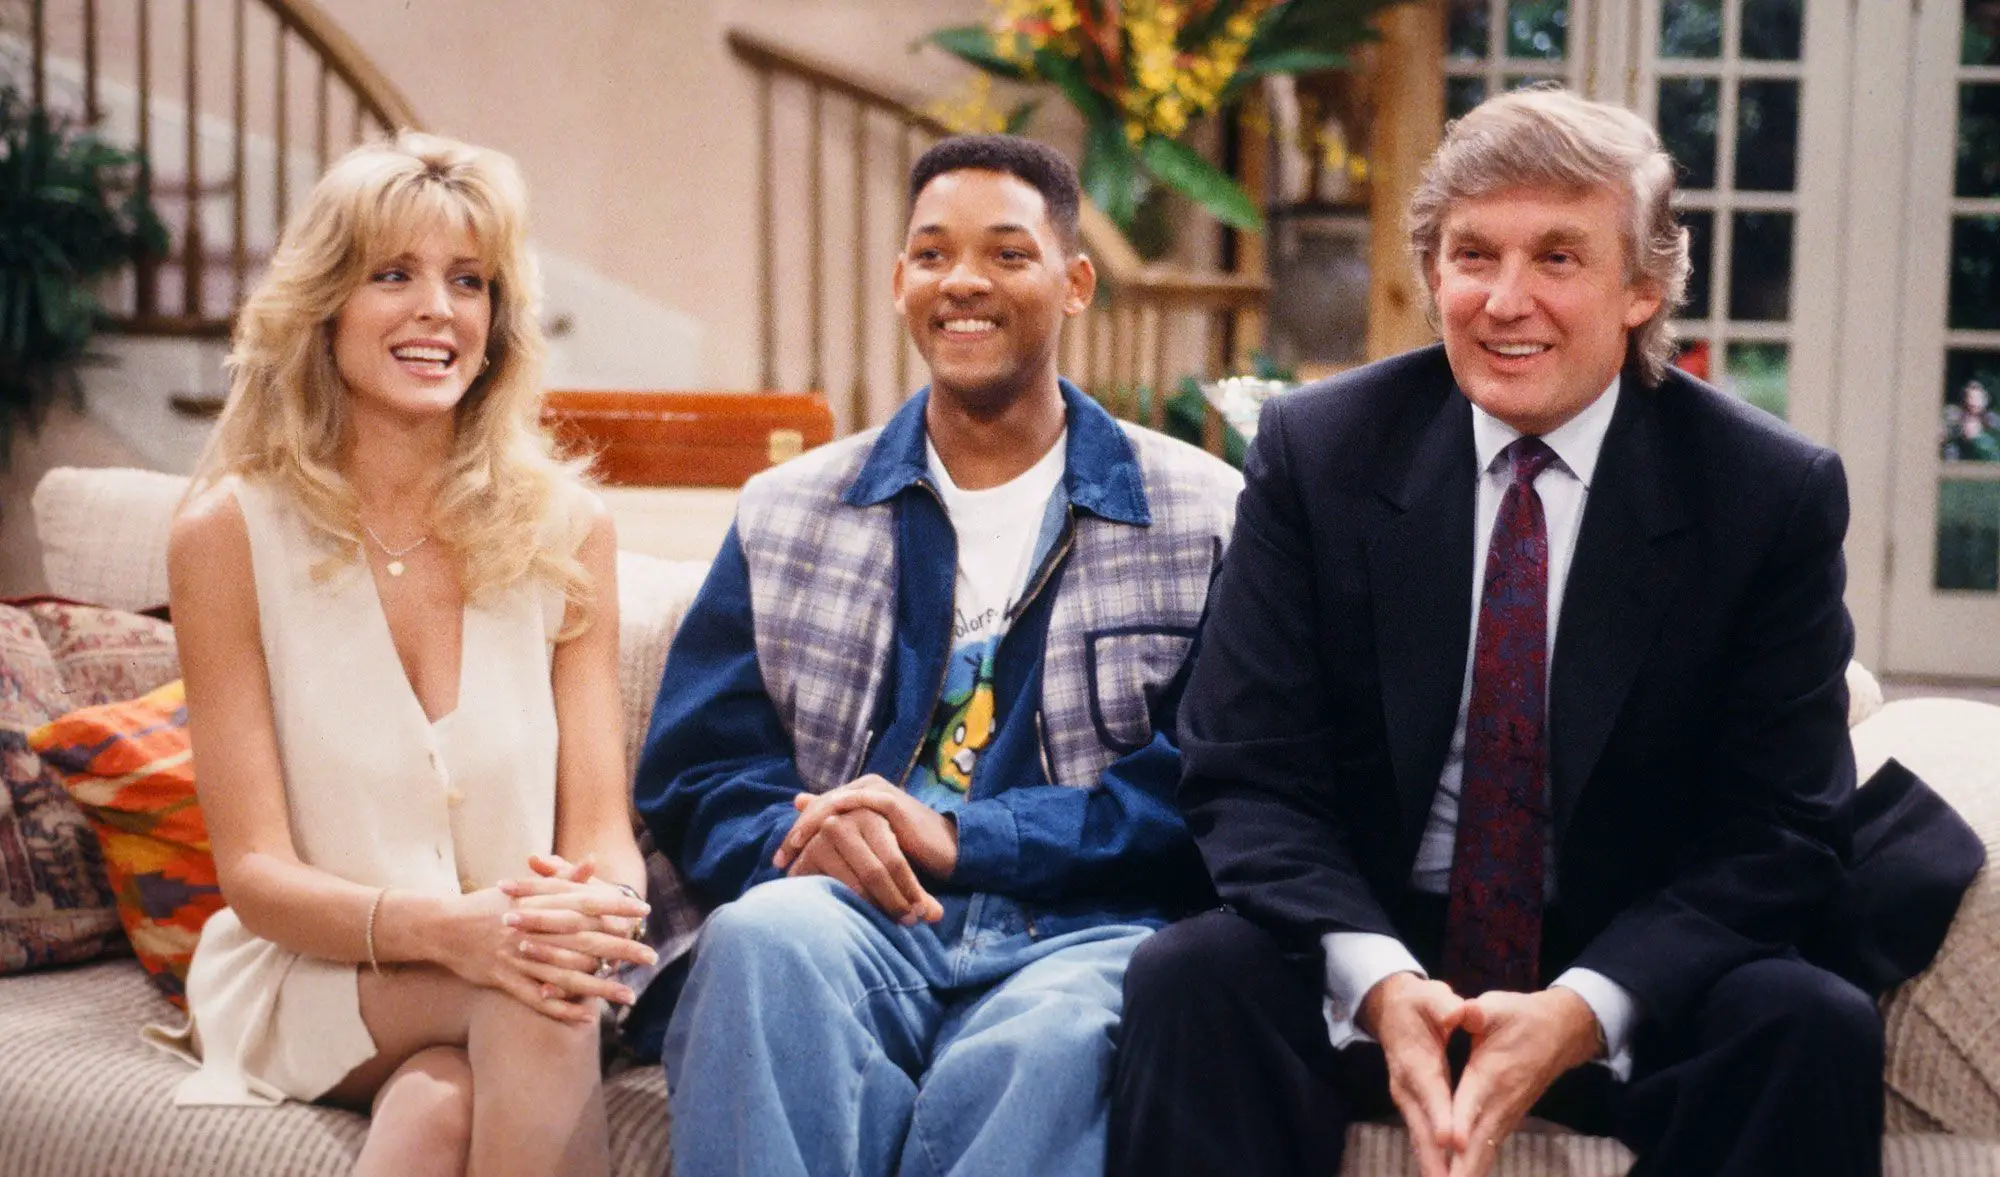 Donald Trump on The Fresh Prince of Bel-Air